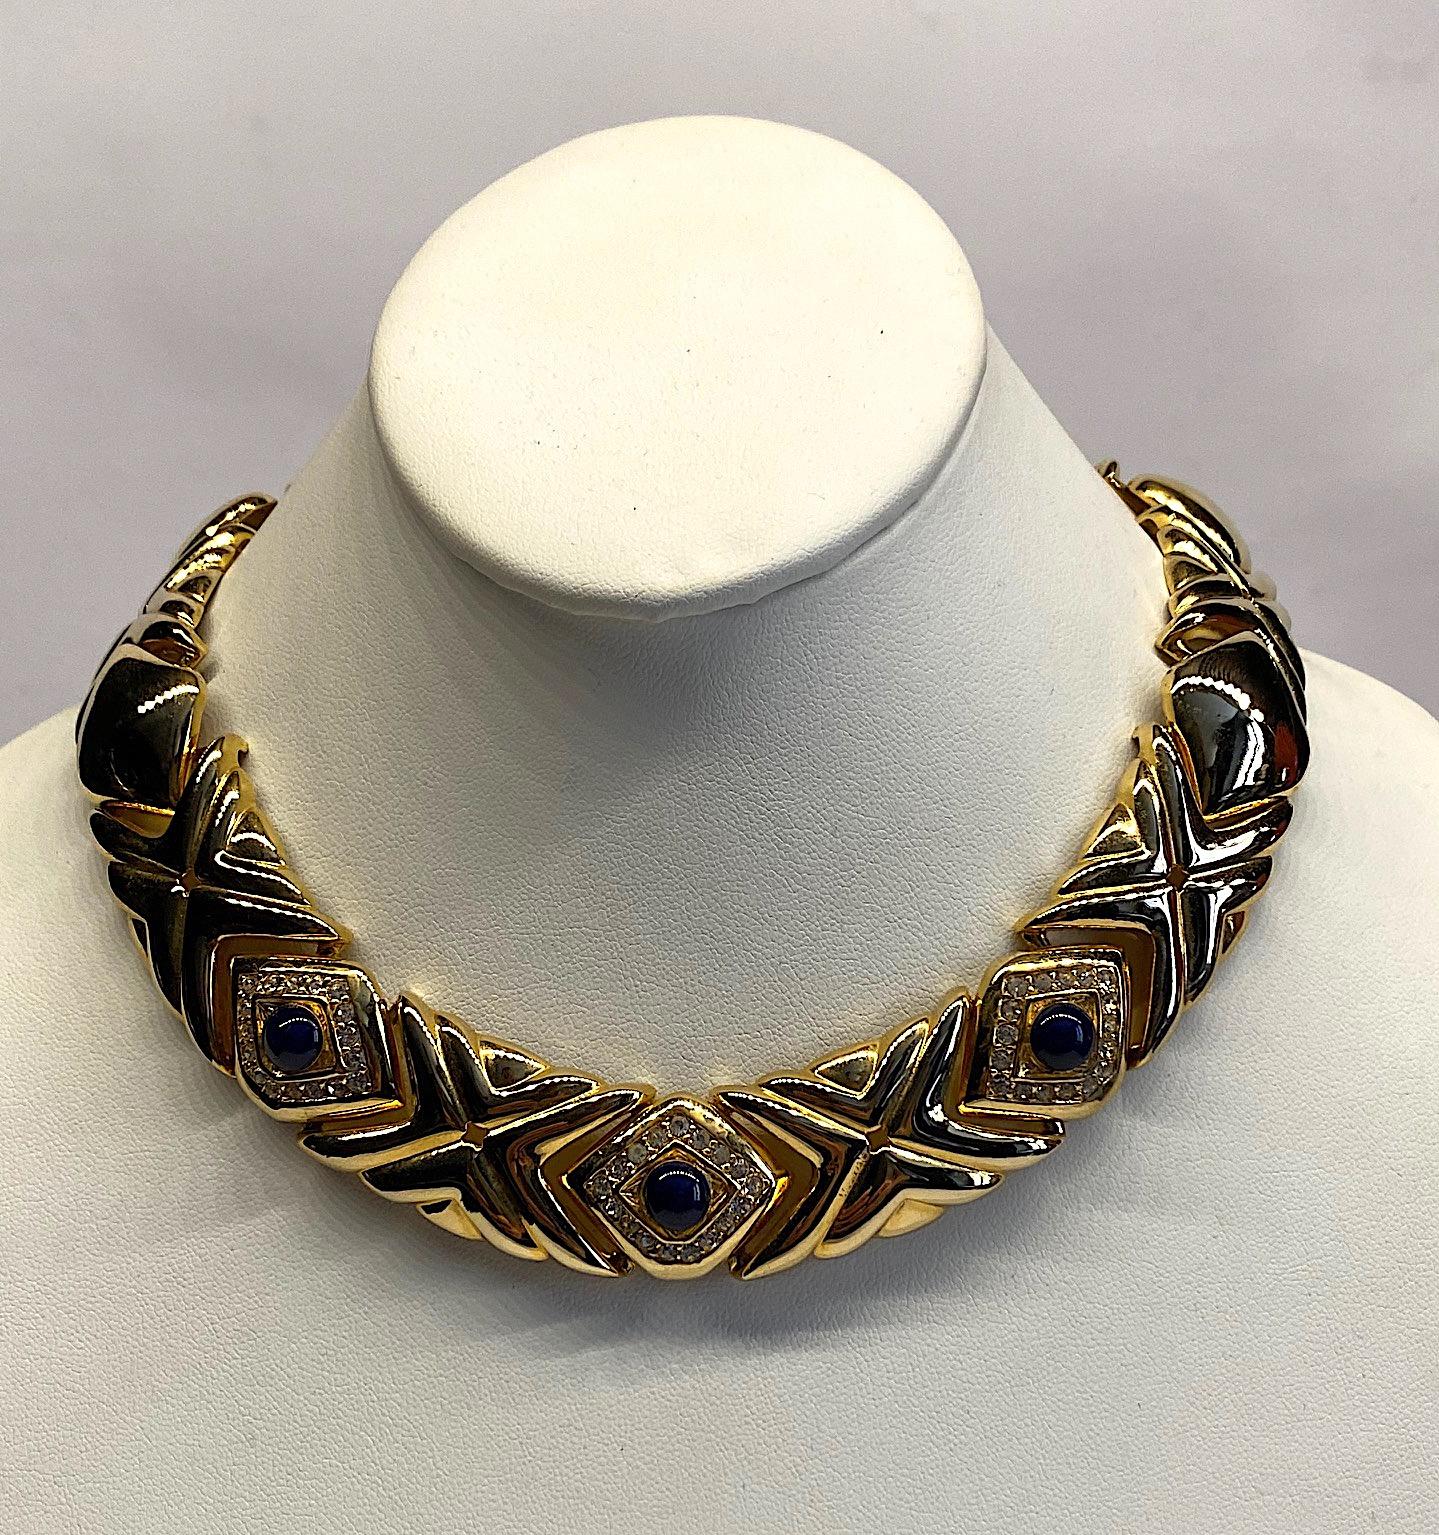 A chic tailored style Givenchy necklace from the 1980s. There are two different style links. One is a plain diamond shaped and the other is a larger elongated X shape design. The from three diamond links have a navy blue cabochon stone surrounded by